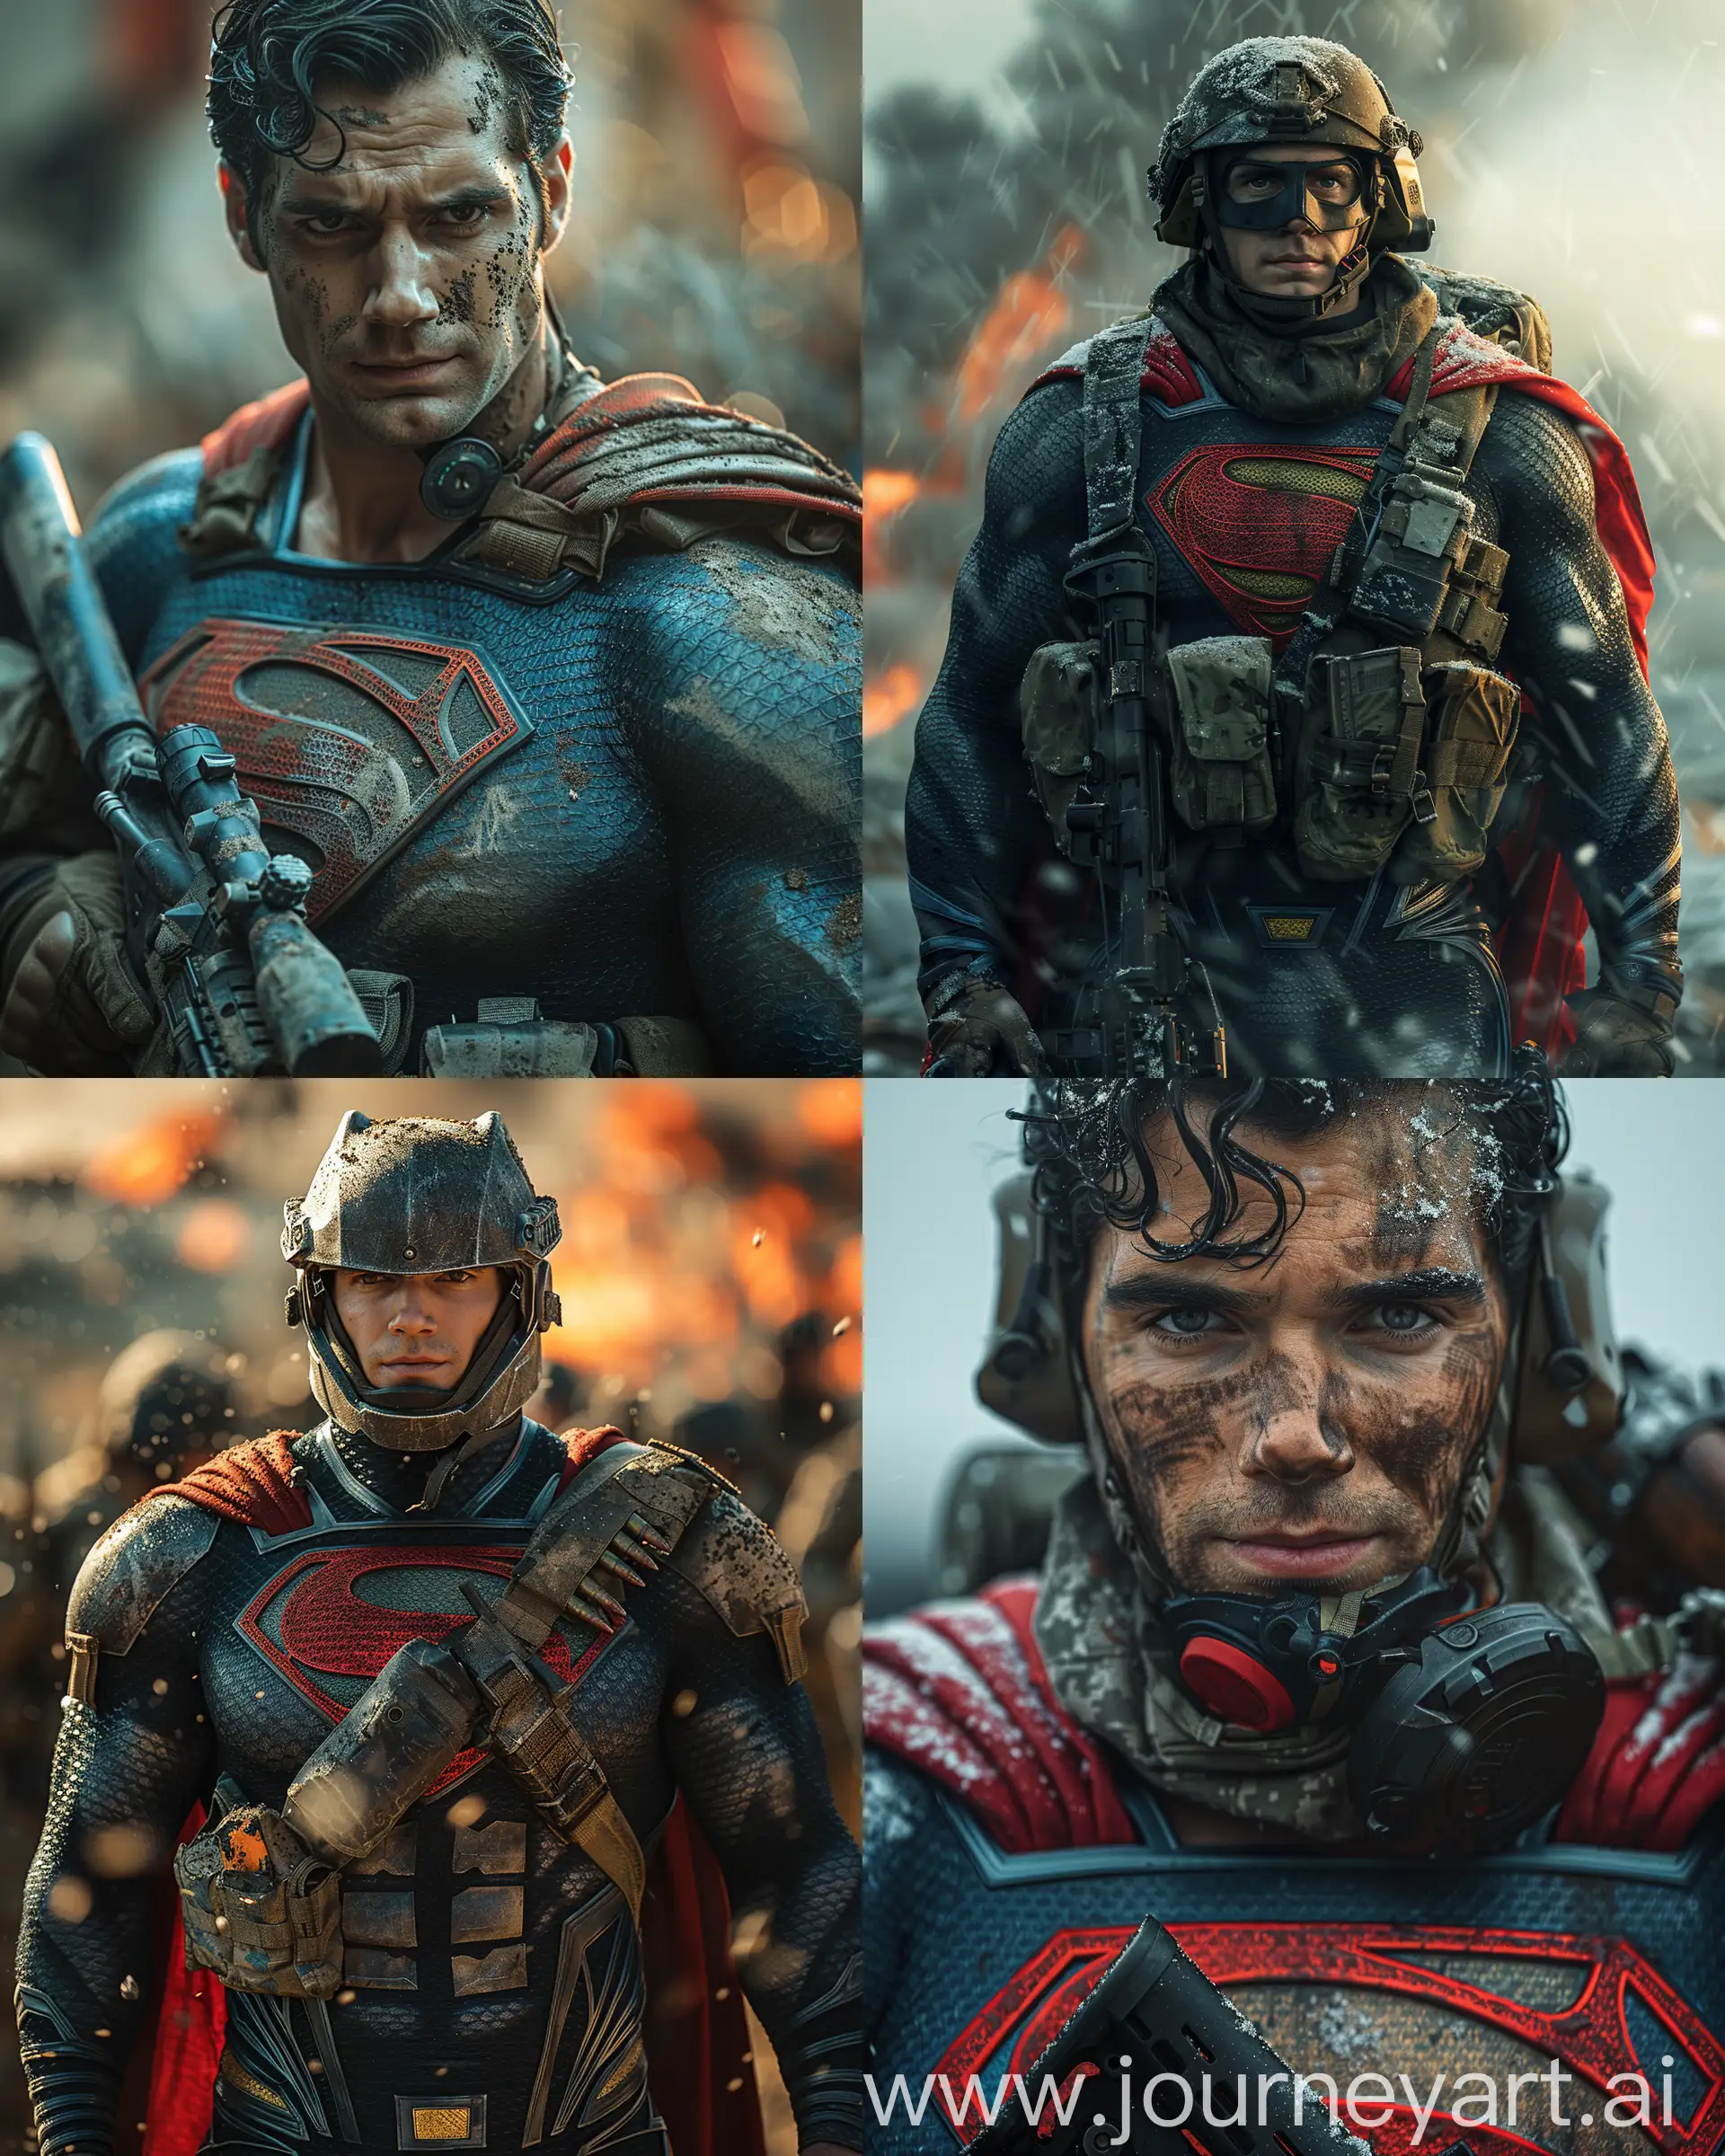 Superman-in-Special-Forces-Military-Uniform-with-Advanced-Weapons